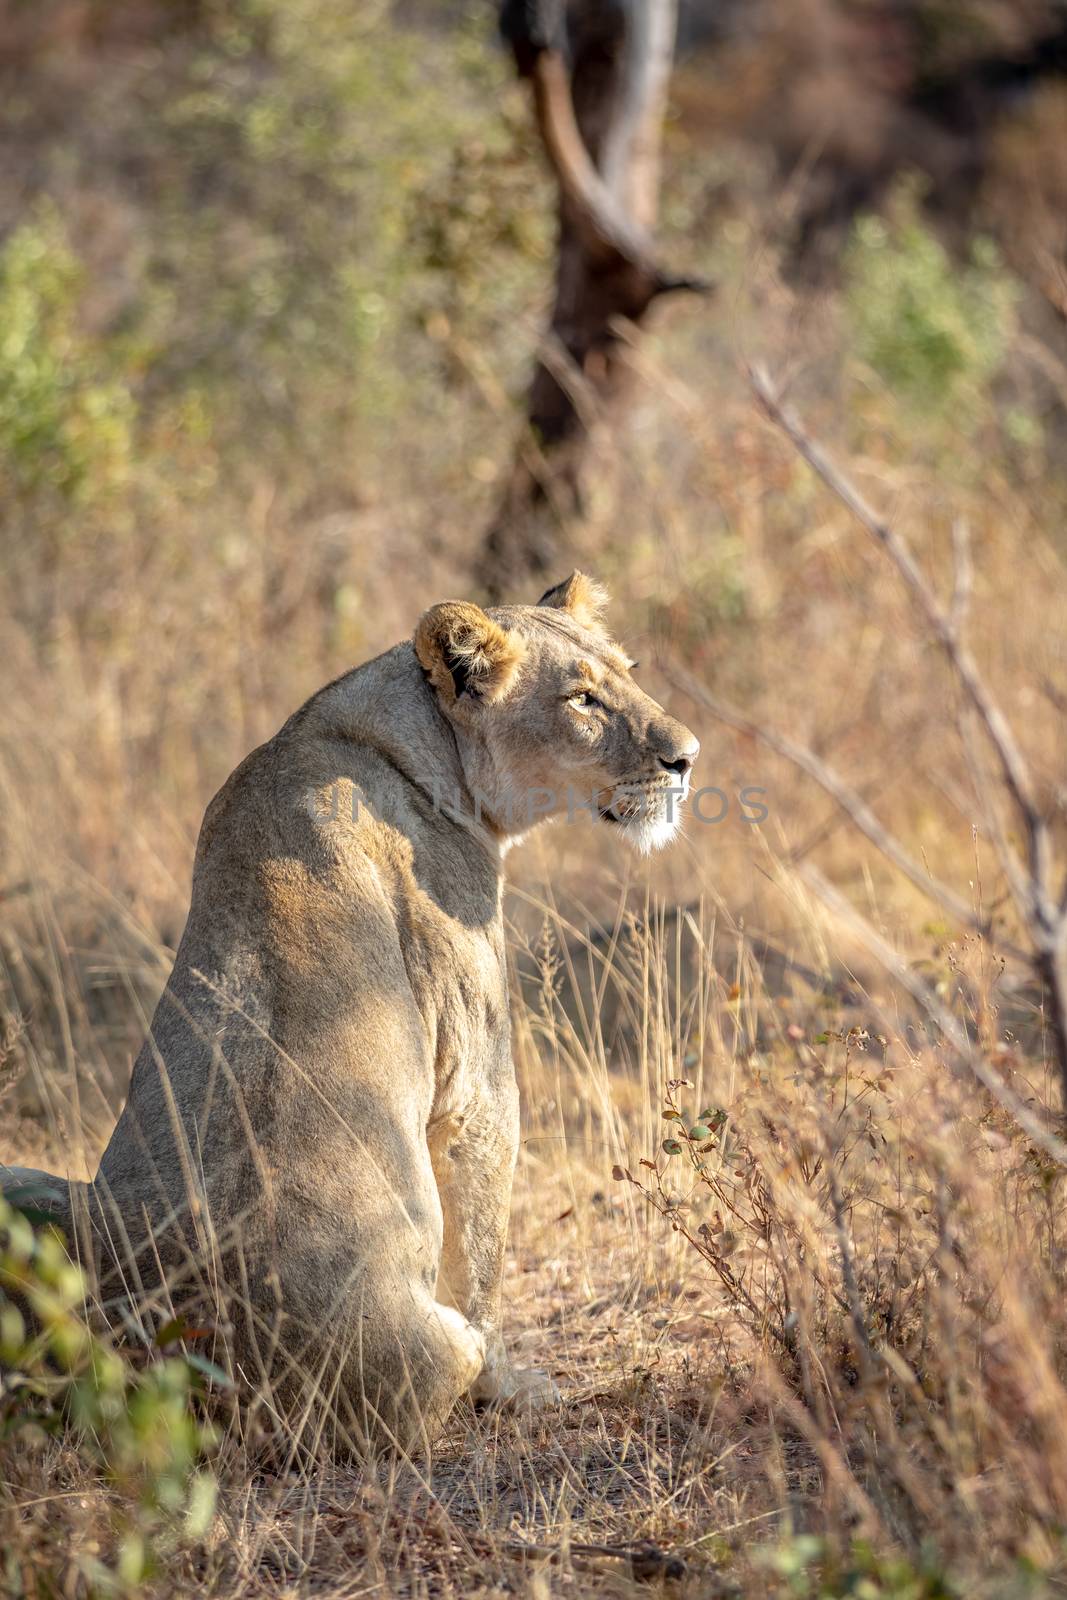 Lioness sitting in the grass and looking. by Simoneemanphotography